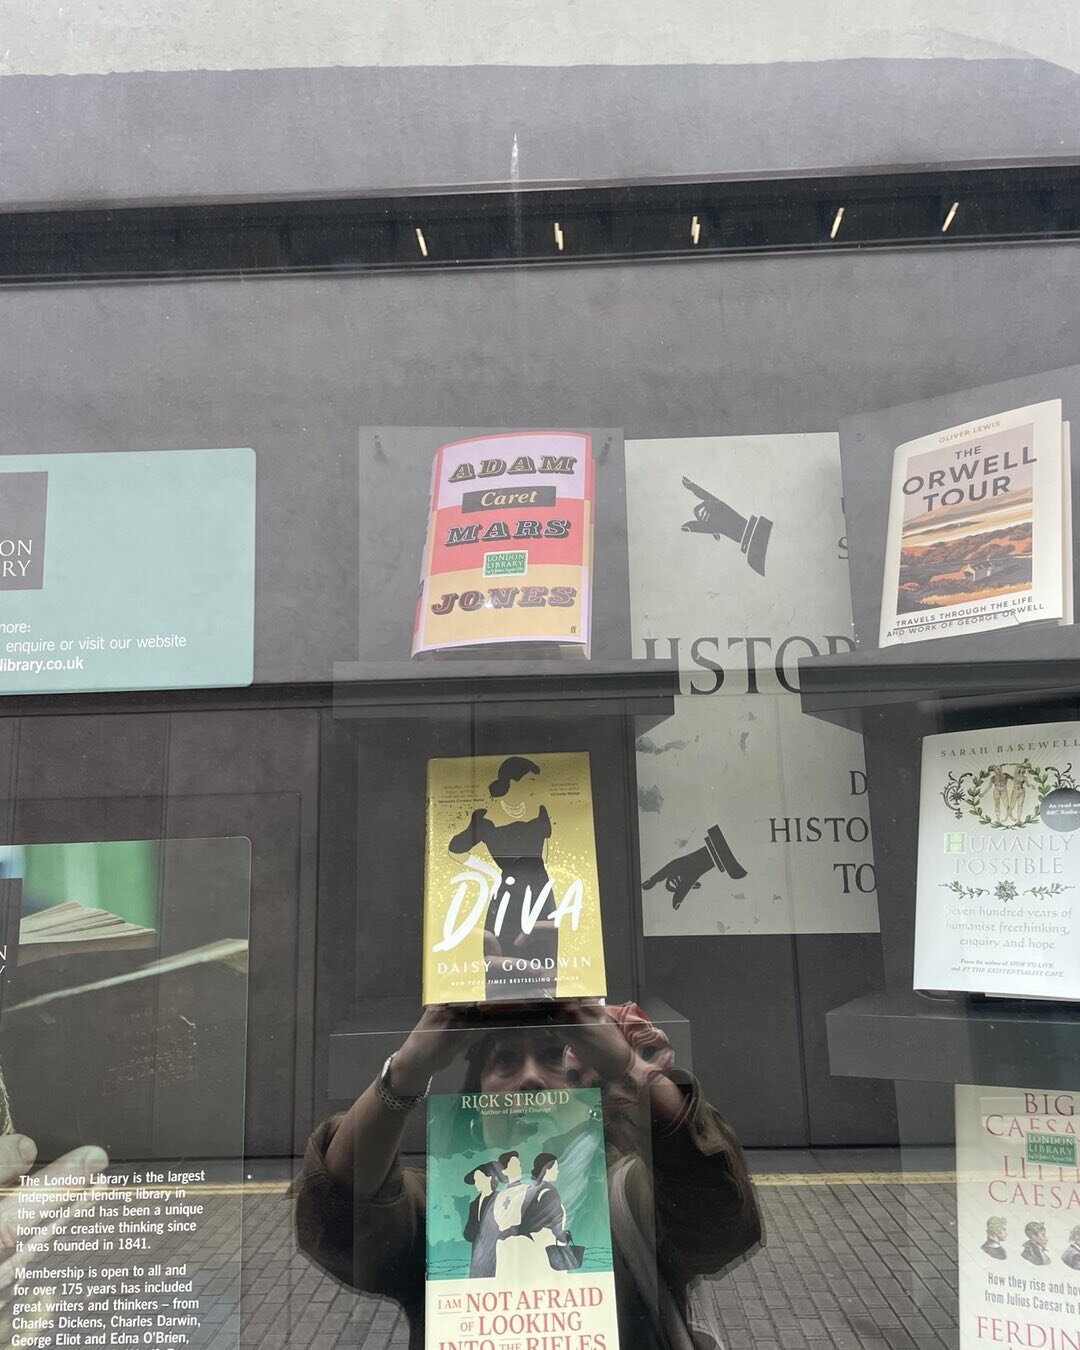 My Diva in a distinguished curtain call in the members' book window of @thelondonlibrary - Couldn't have done Maria Callas justice without the thinking space the library gives me.  It costs less than a gin and tonic a week and is so much better for y